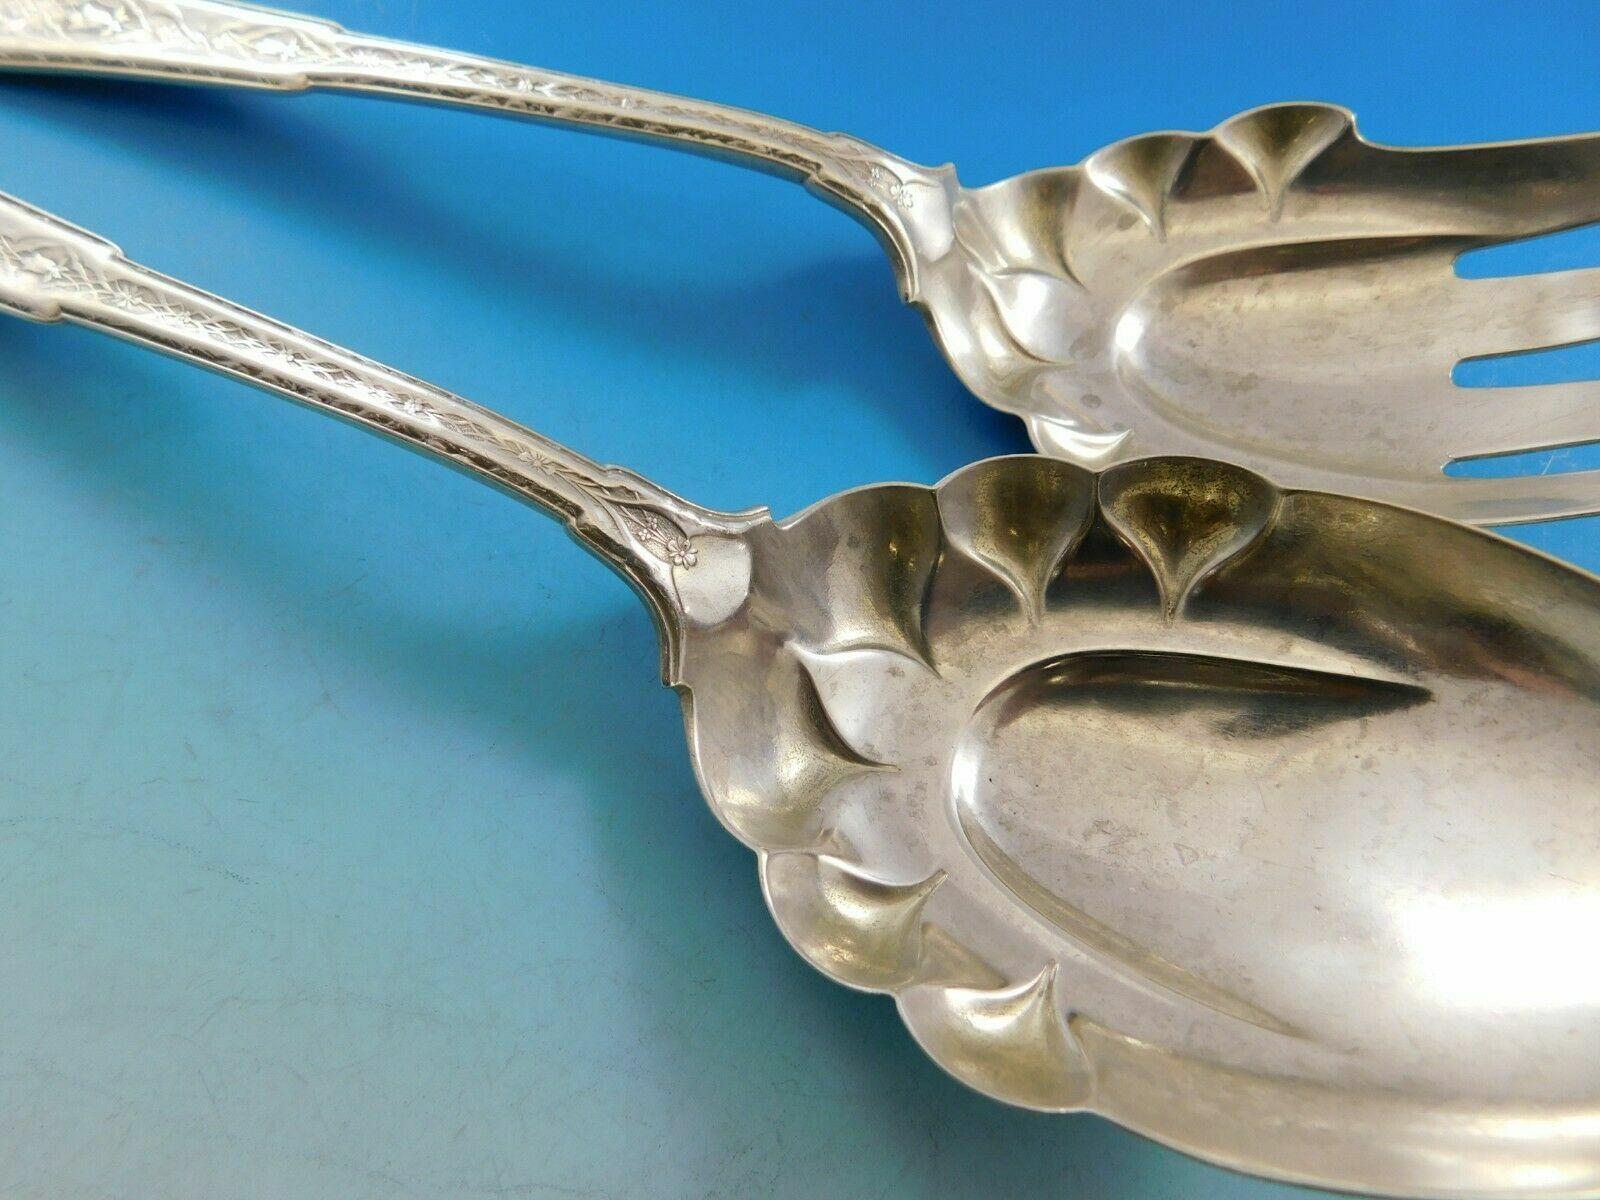 Persian originated in 1872 when exotic lands were in vogue (Japanese, Egyptian, Persian). It is absolutely striking with its intricate design. It is a beautiful example of the silver makers art.

Stunning sterling silver salad serving set,